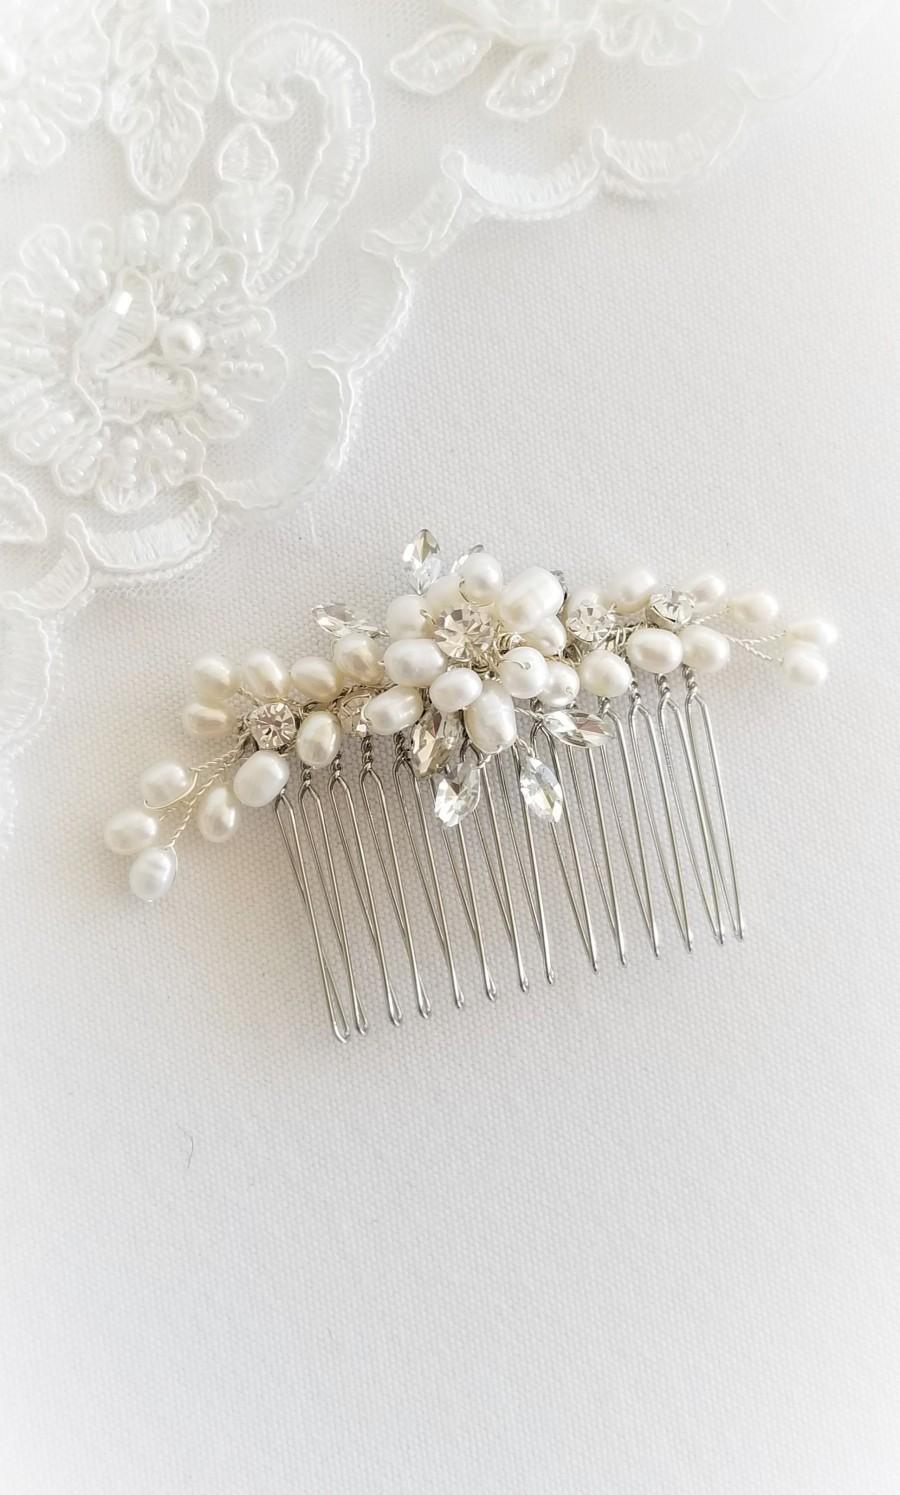 Mariage - Freshwater Pearl Wedding Hair Comb, Small Pearl Crystal Bridal Hair Comb, Pearl Hair Comb for Bride